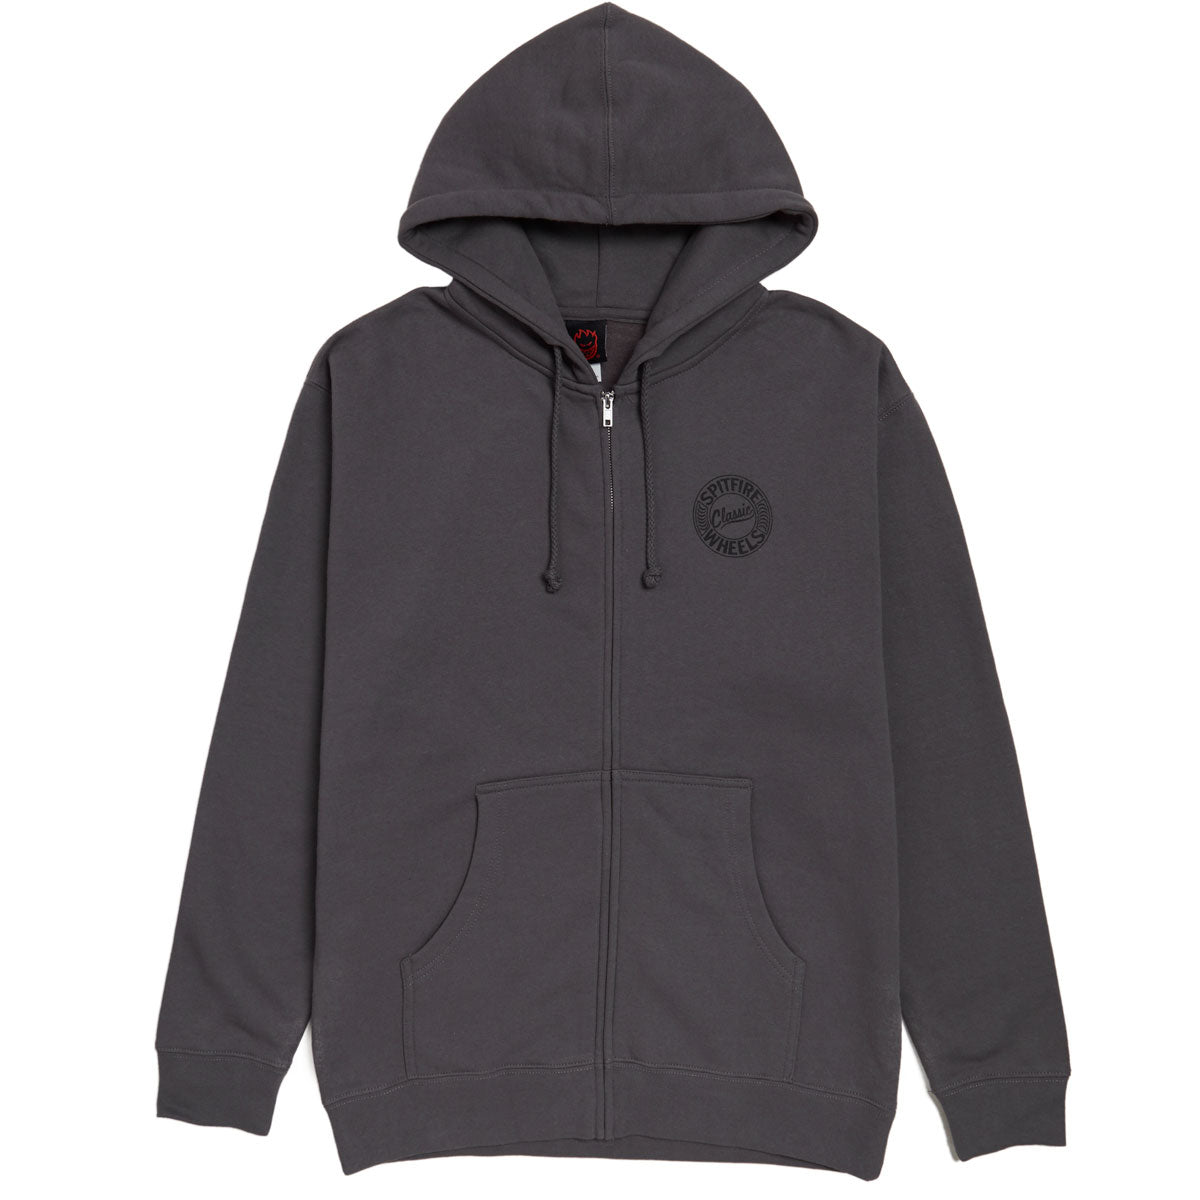 Spitfire Flying Classic Zip Up Hoodie - Charcoal